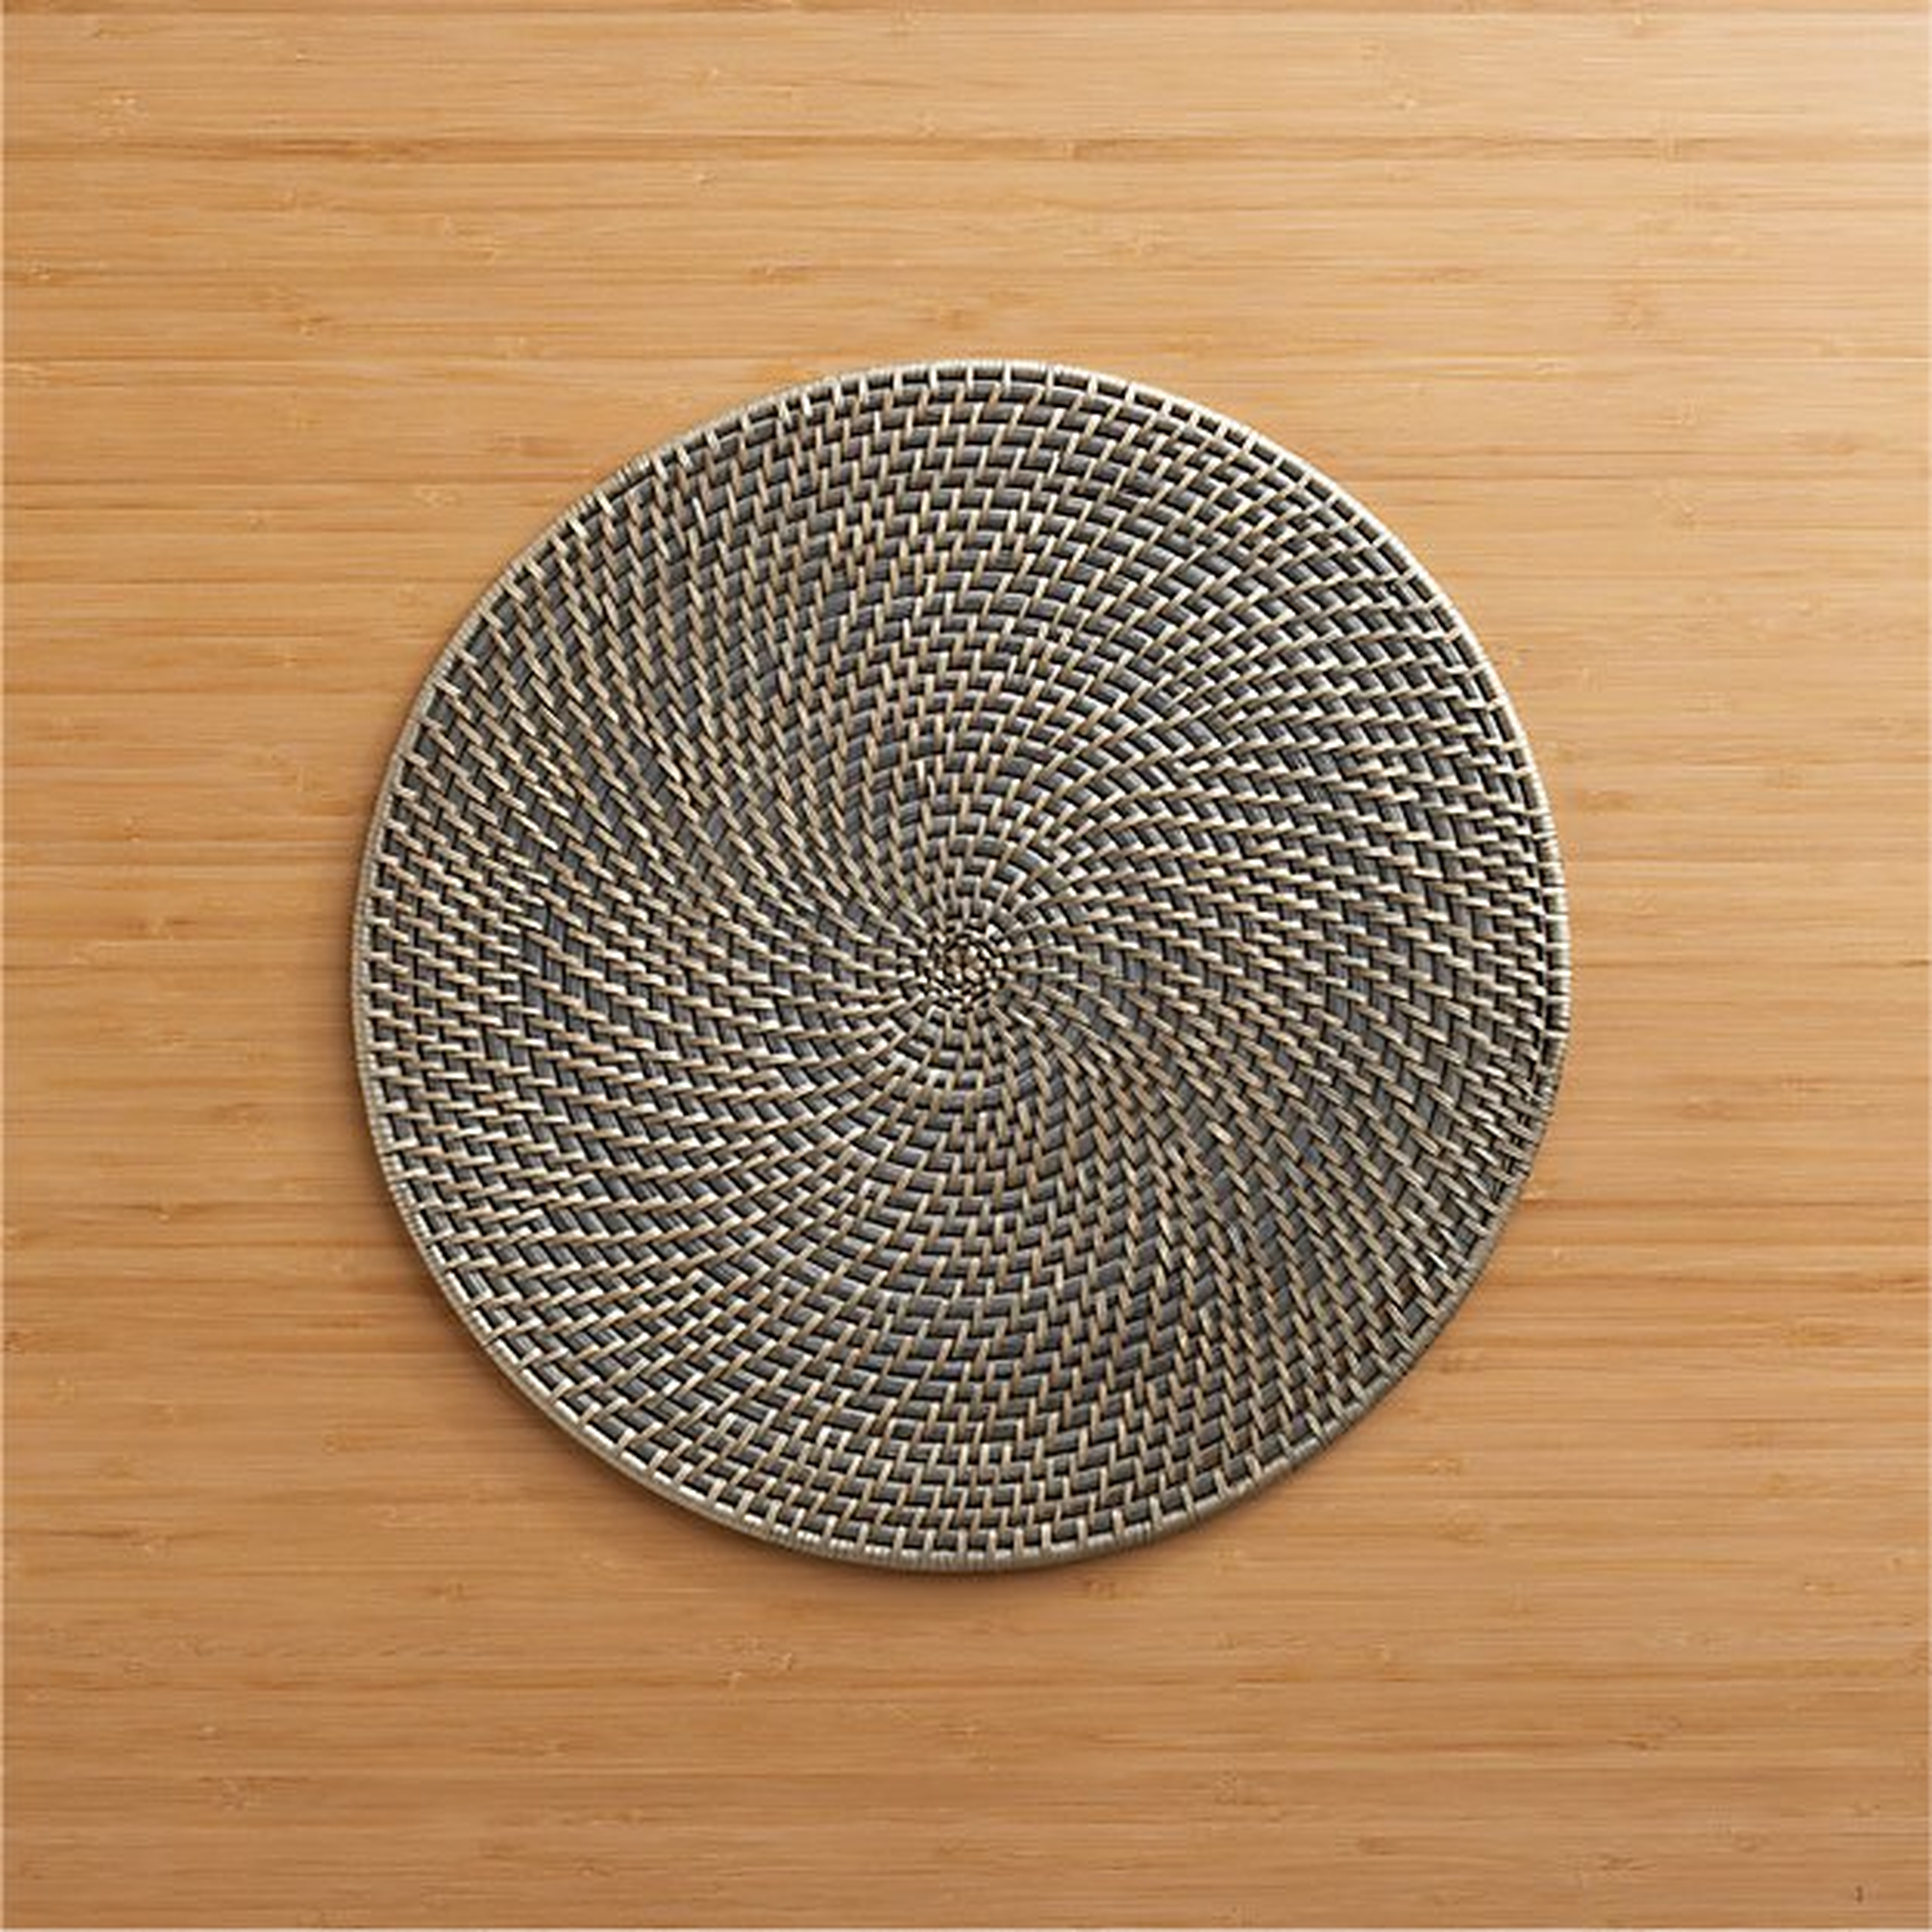 Artesia Round Grey Woven Rattan Placemat - Crate and Barrel